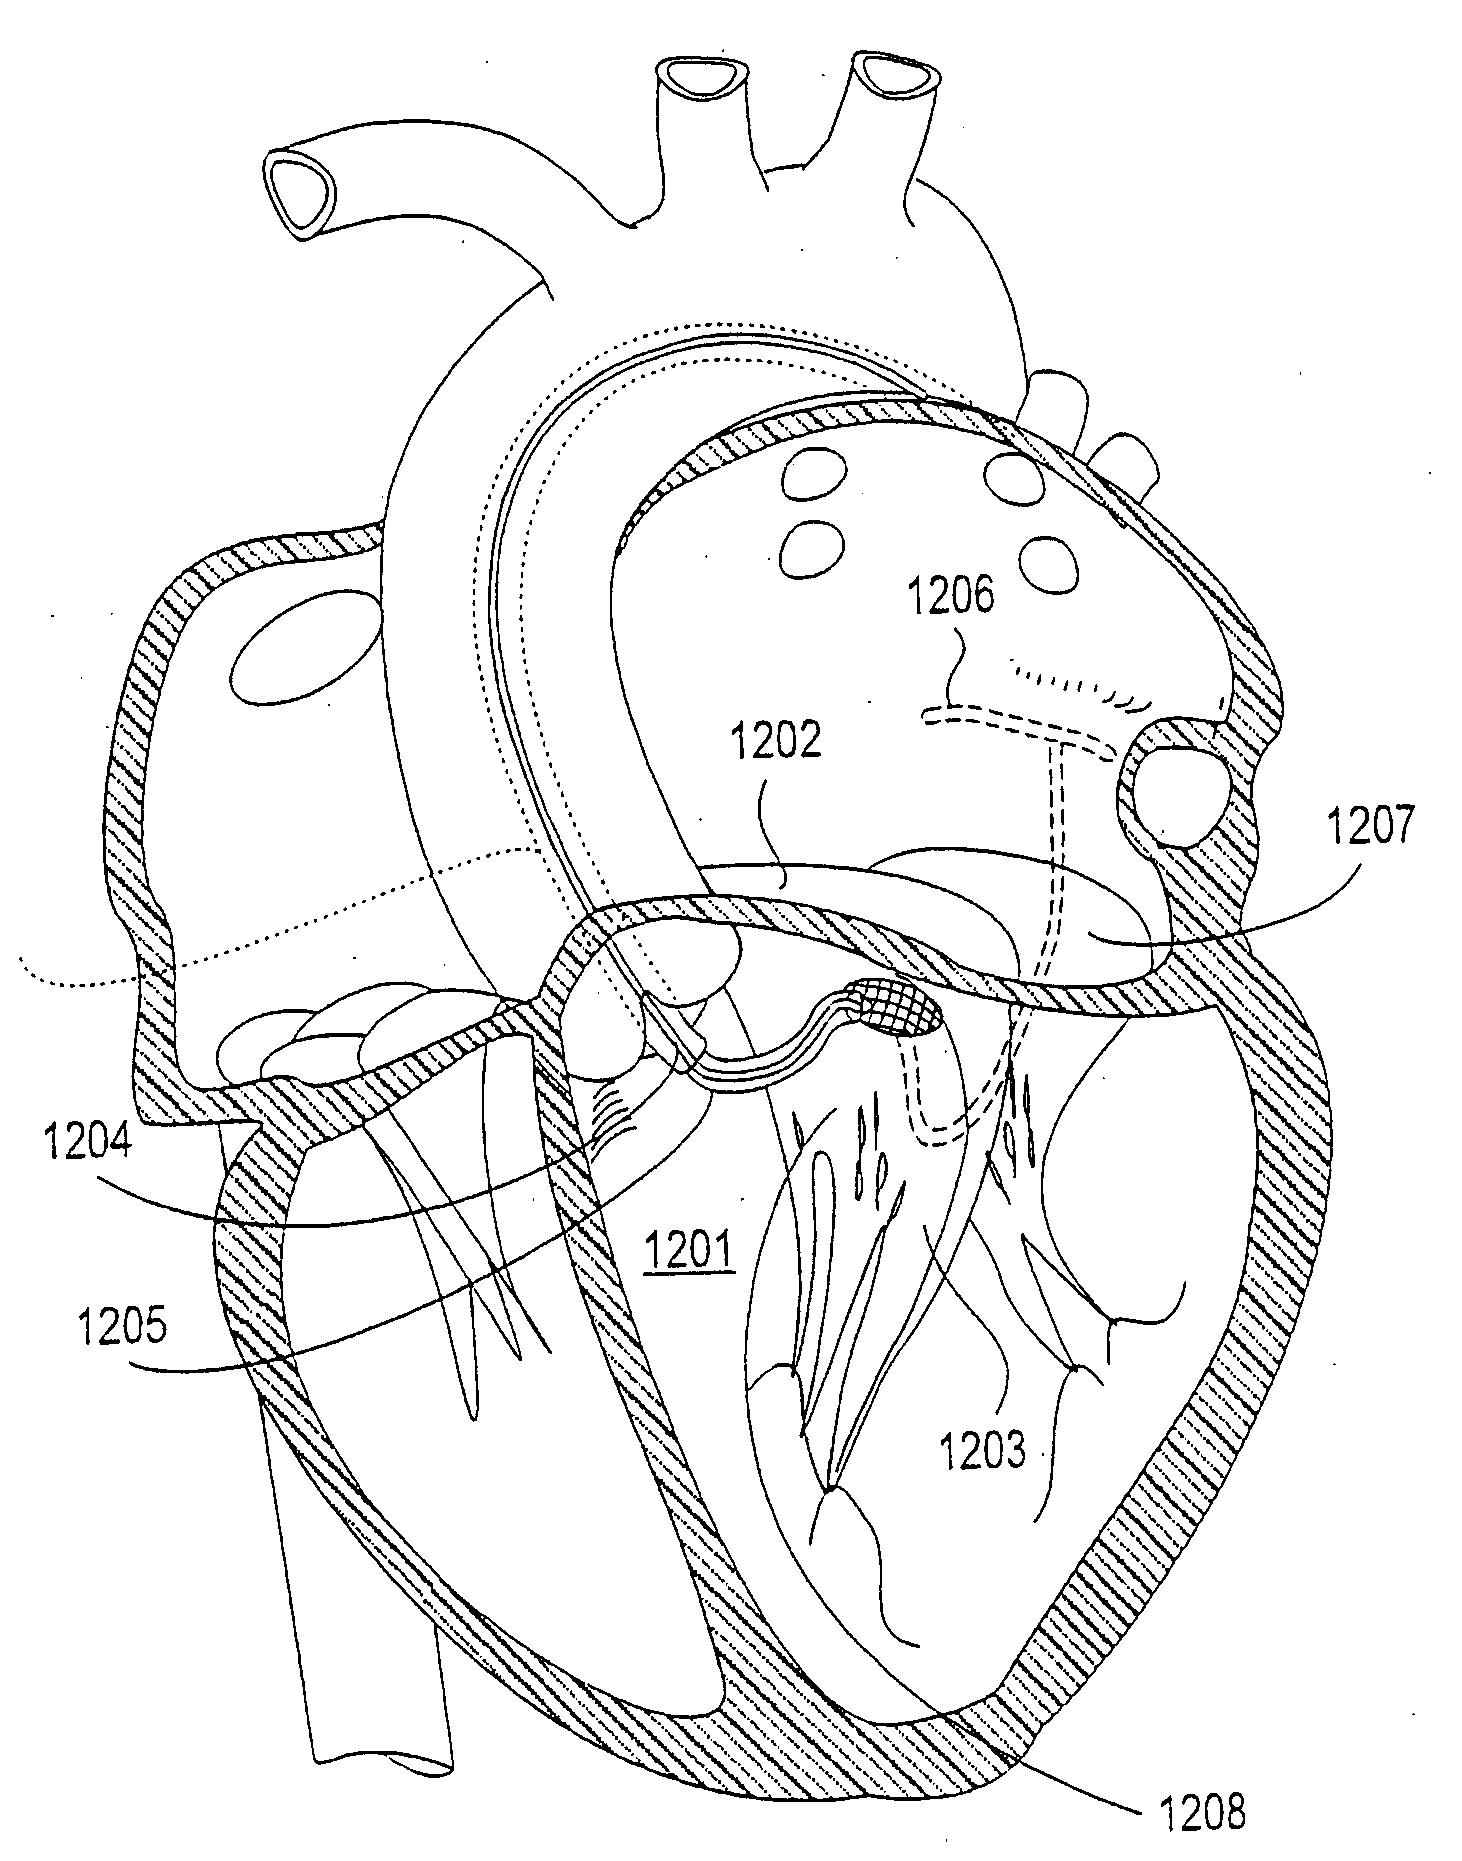 Atrioventricular valve annulus repair systems and methods including retro-chordal anchors